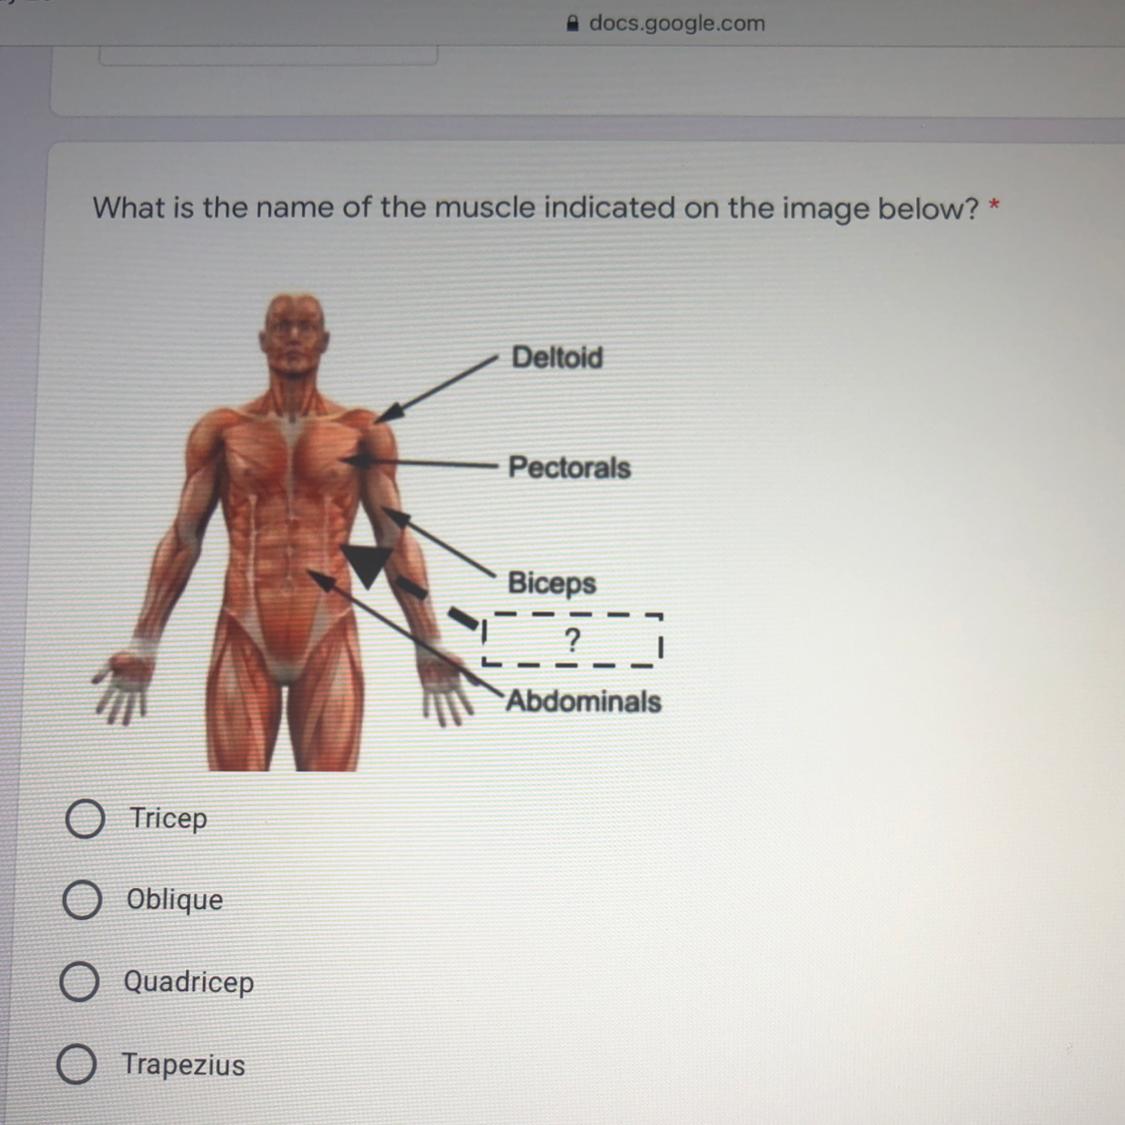 Whats The Name Of The Muscle Indicated On The Image Below?1.Tricep2.Oblique3.Quadricep4.Trapezius